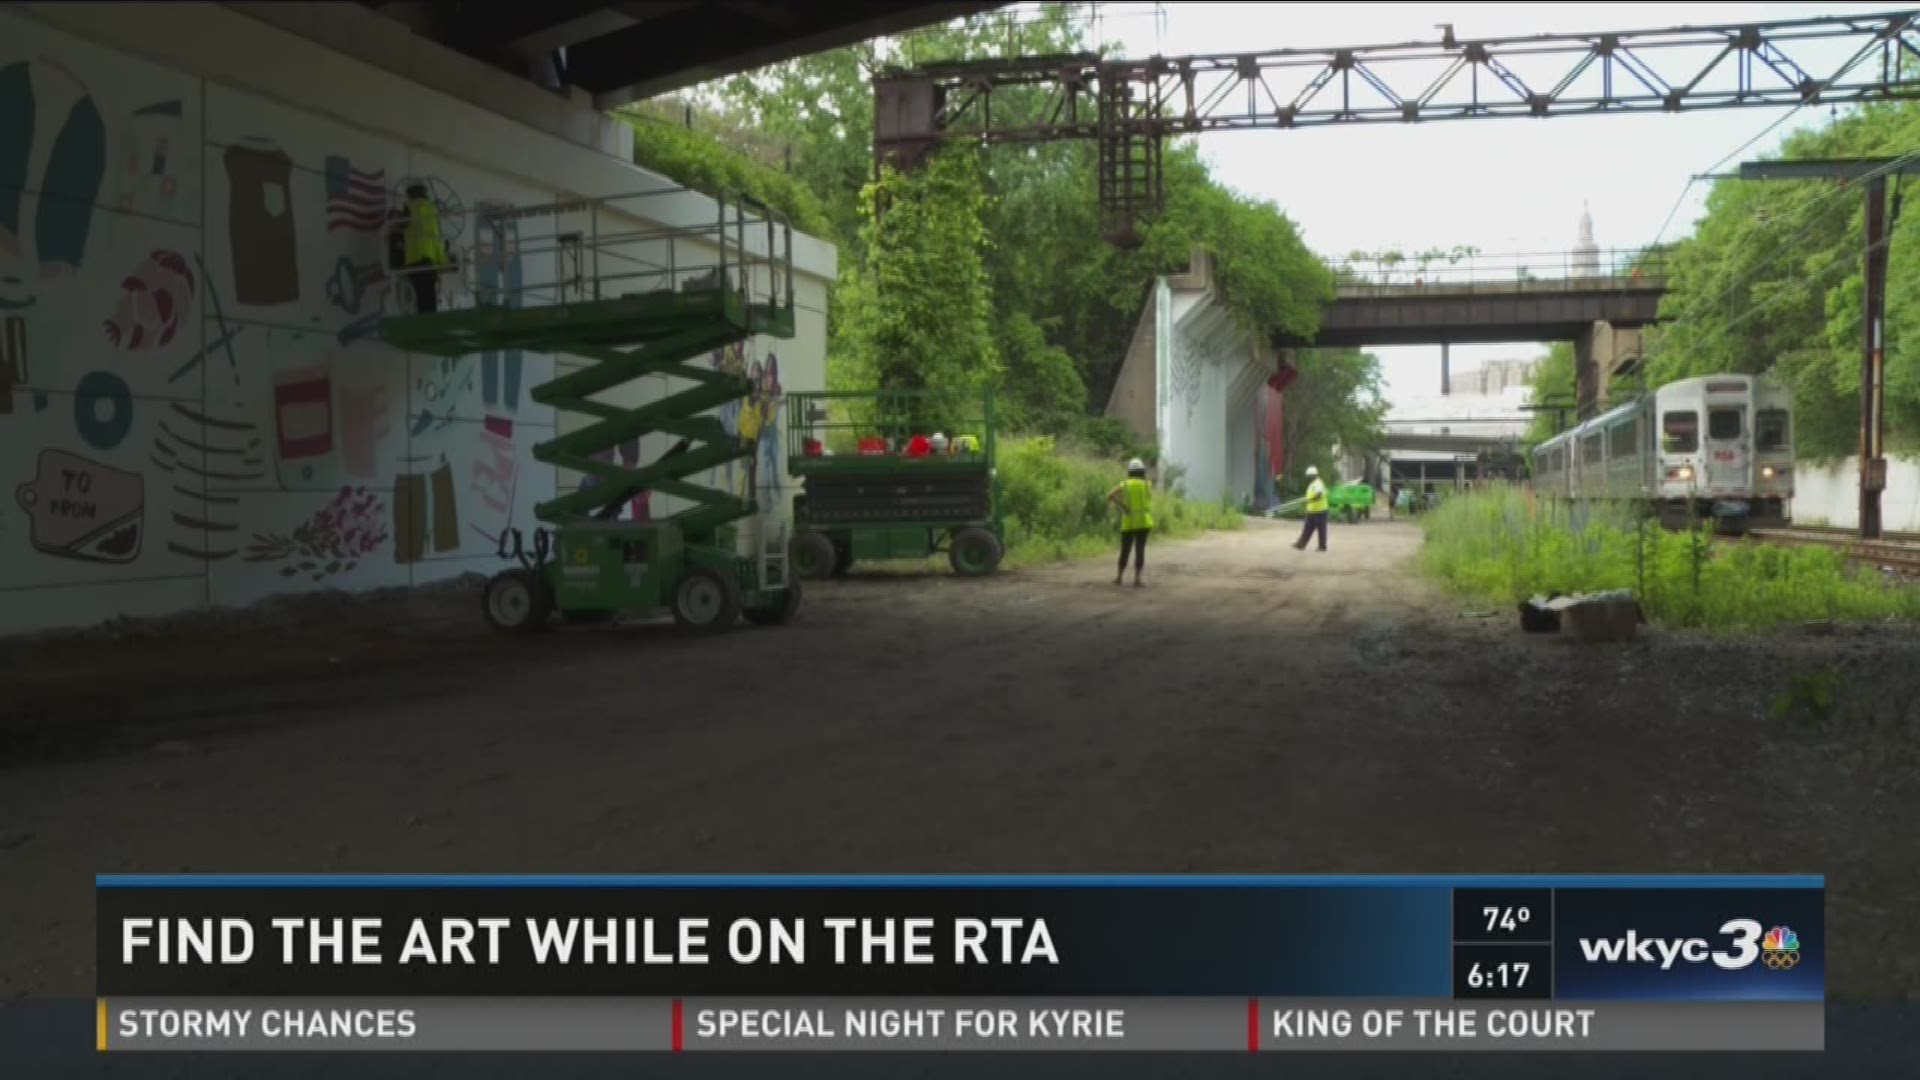 Find the art while on the RTA